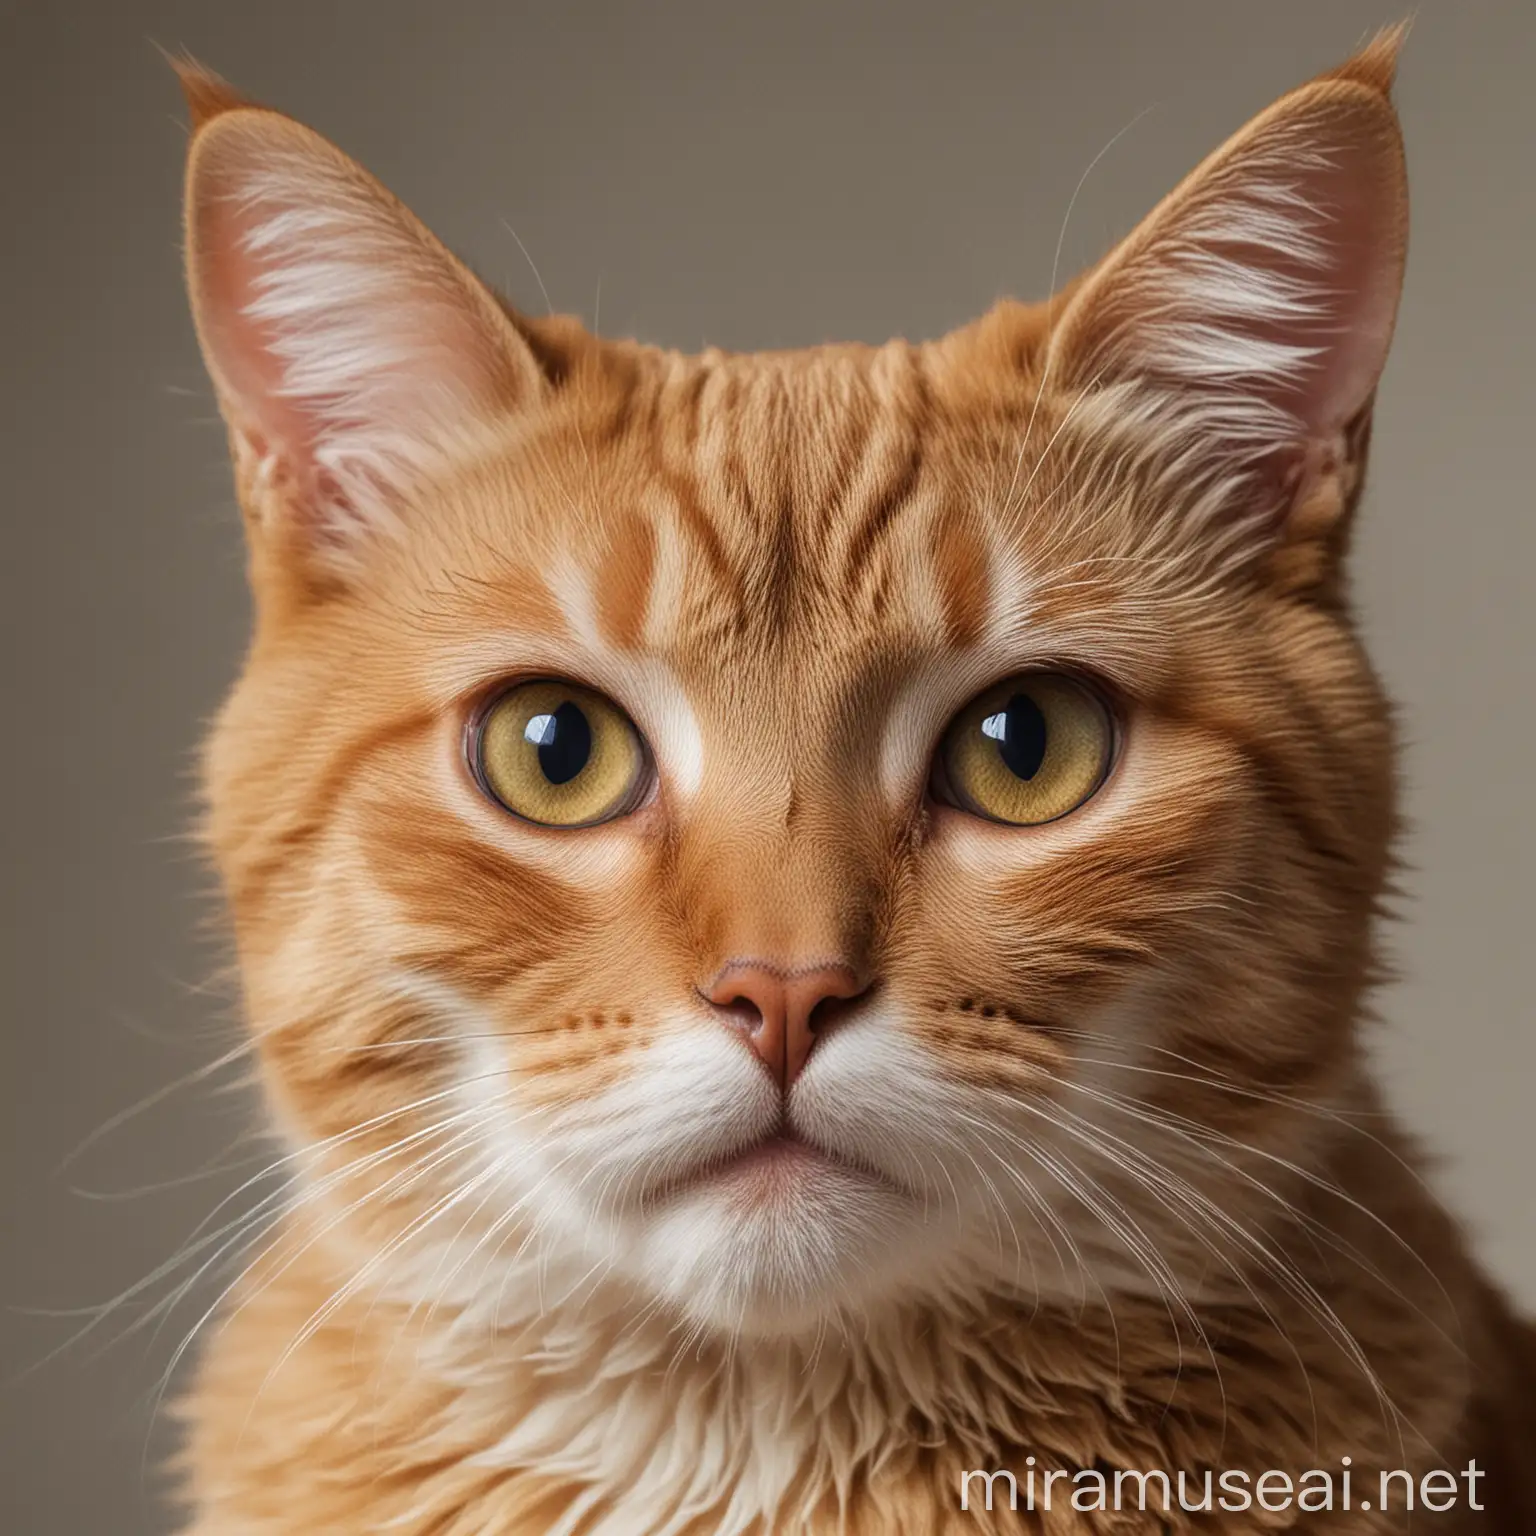 Take captivating solo portraits of your cat focusing on their face, expressions, and personality.